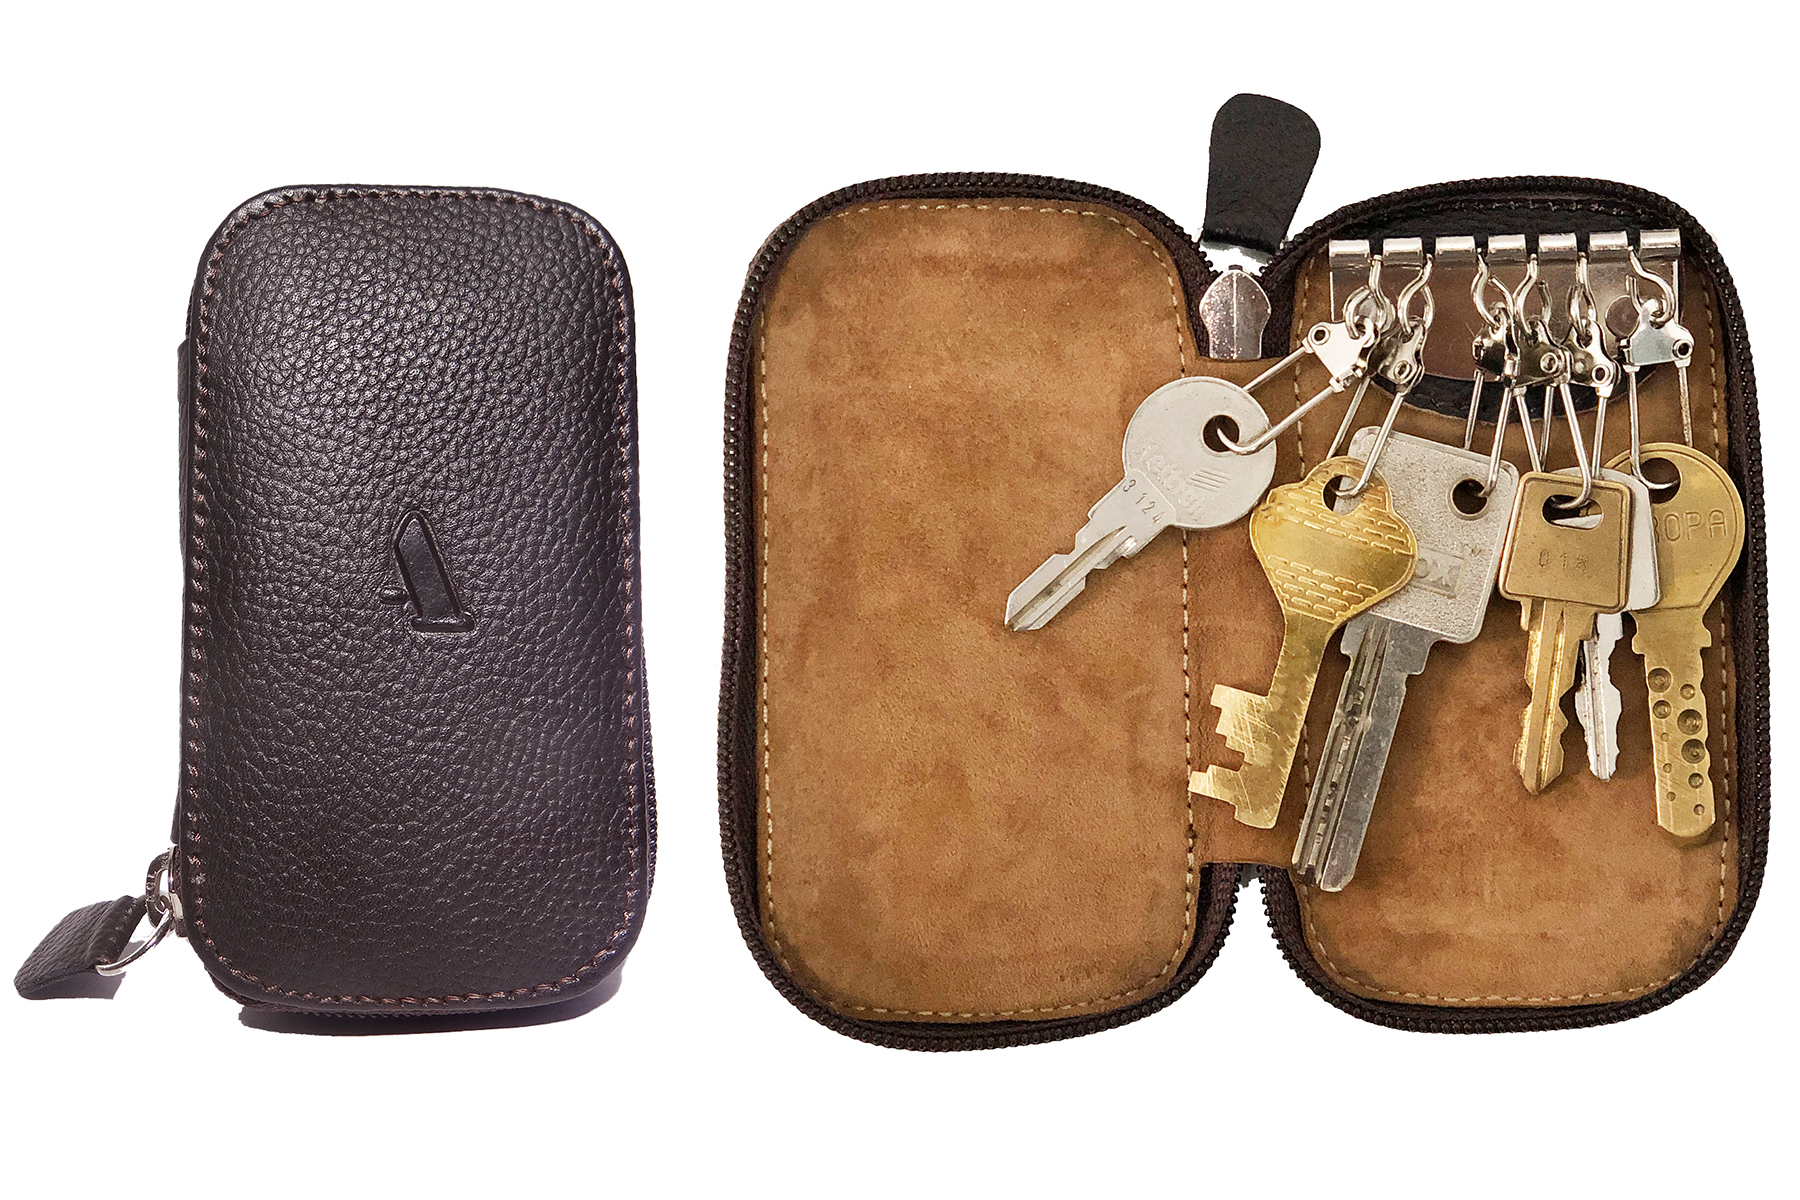 Key Chain--Keycase with zipper closing in Genuine Leather - Brown